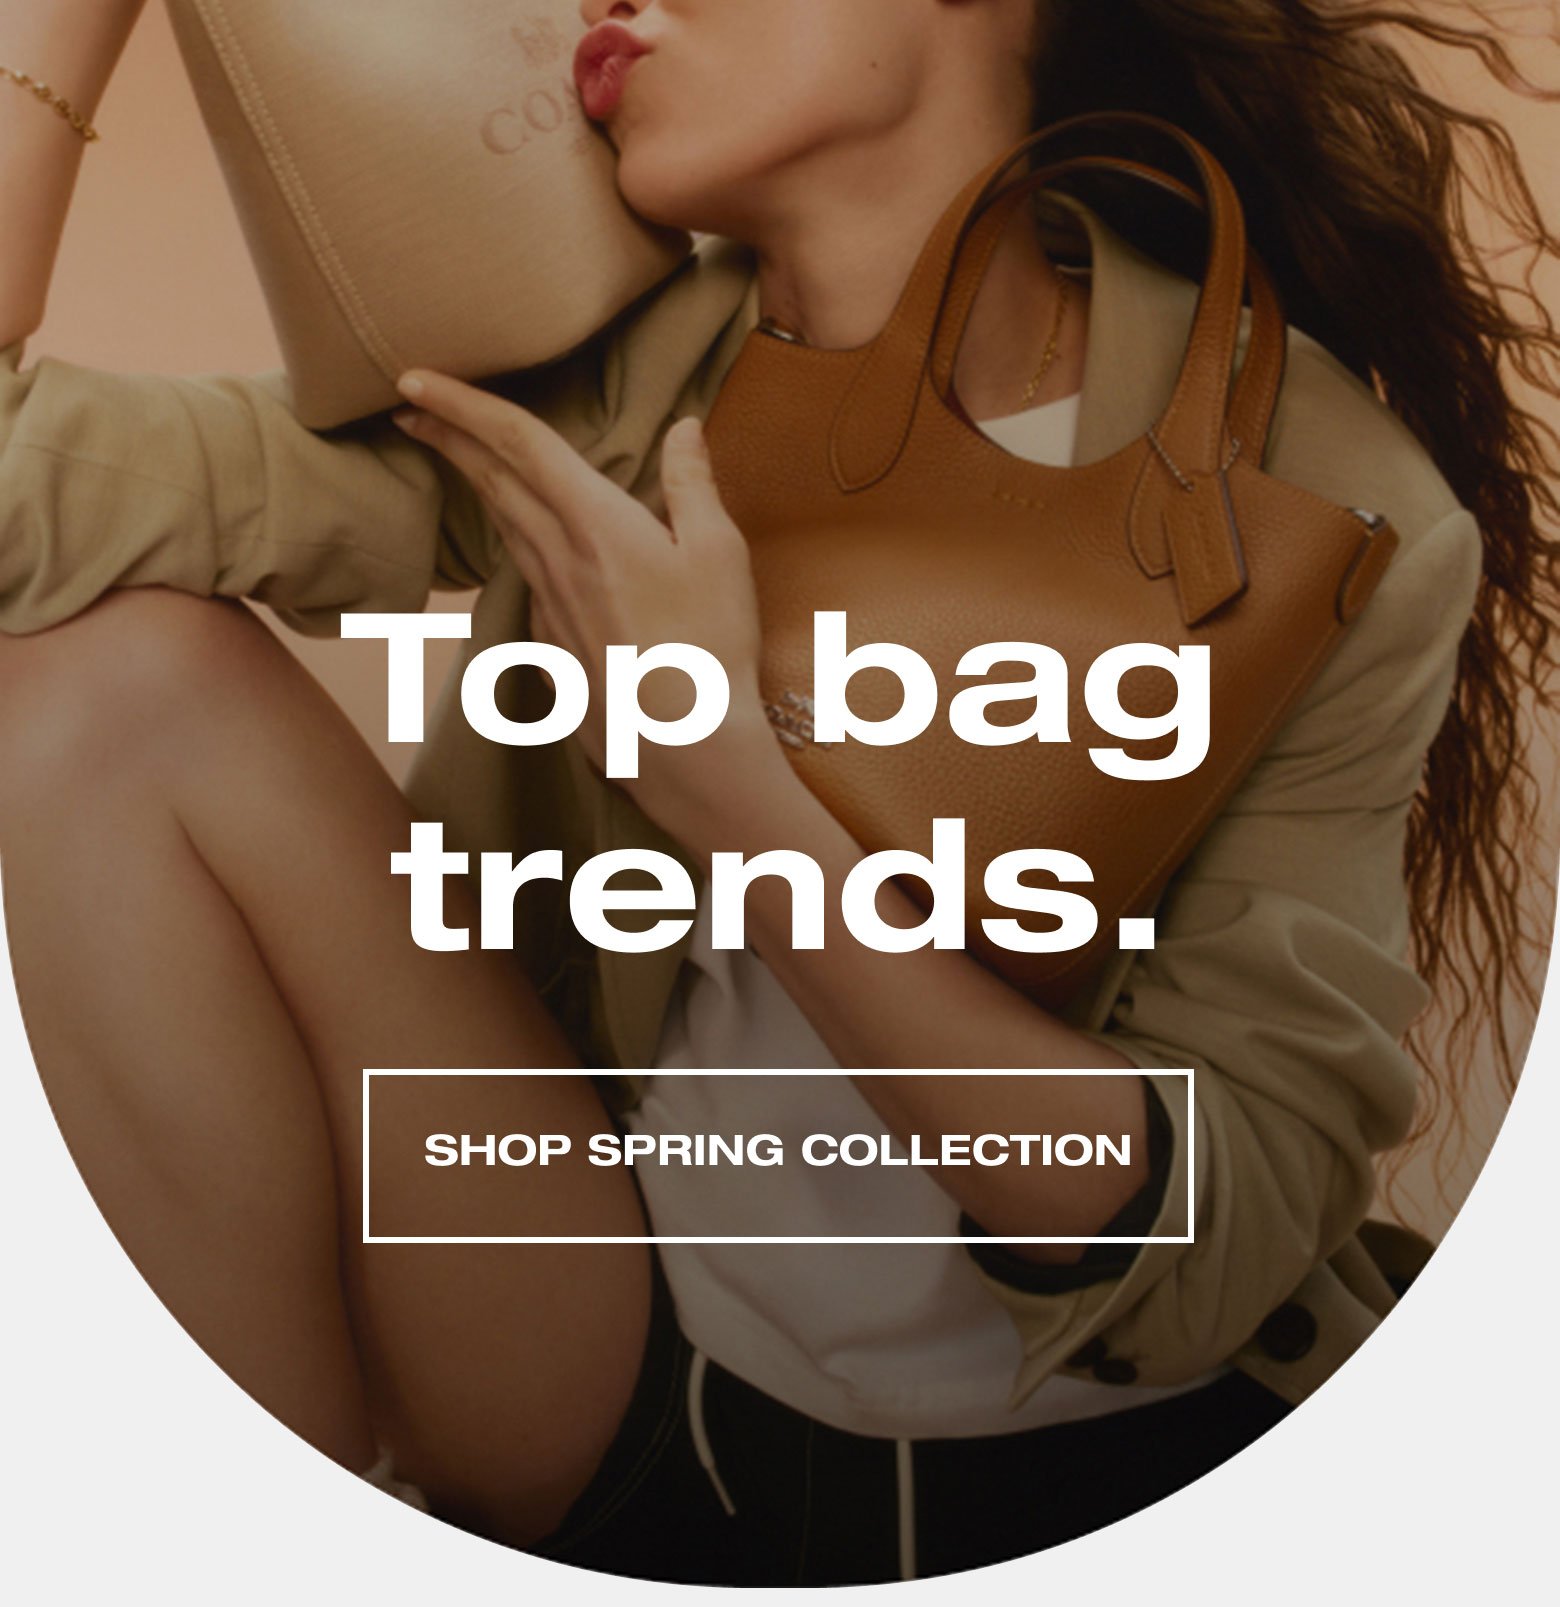 Top bag trends. SHOP SPRING COLLECTION